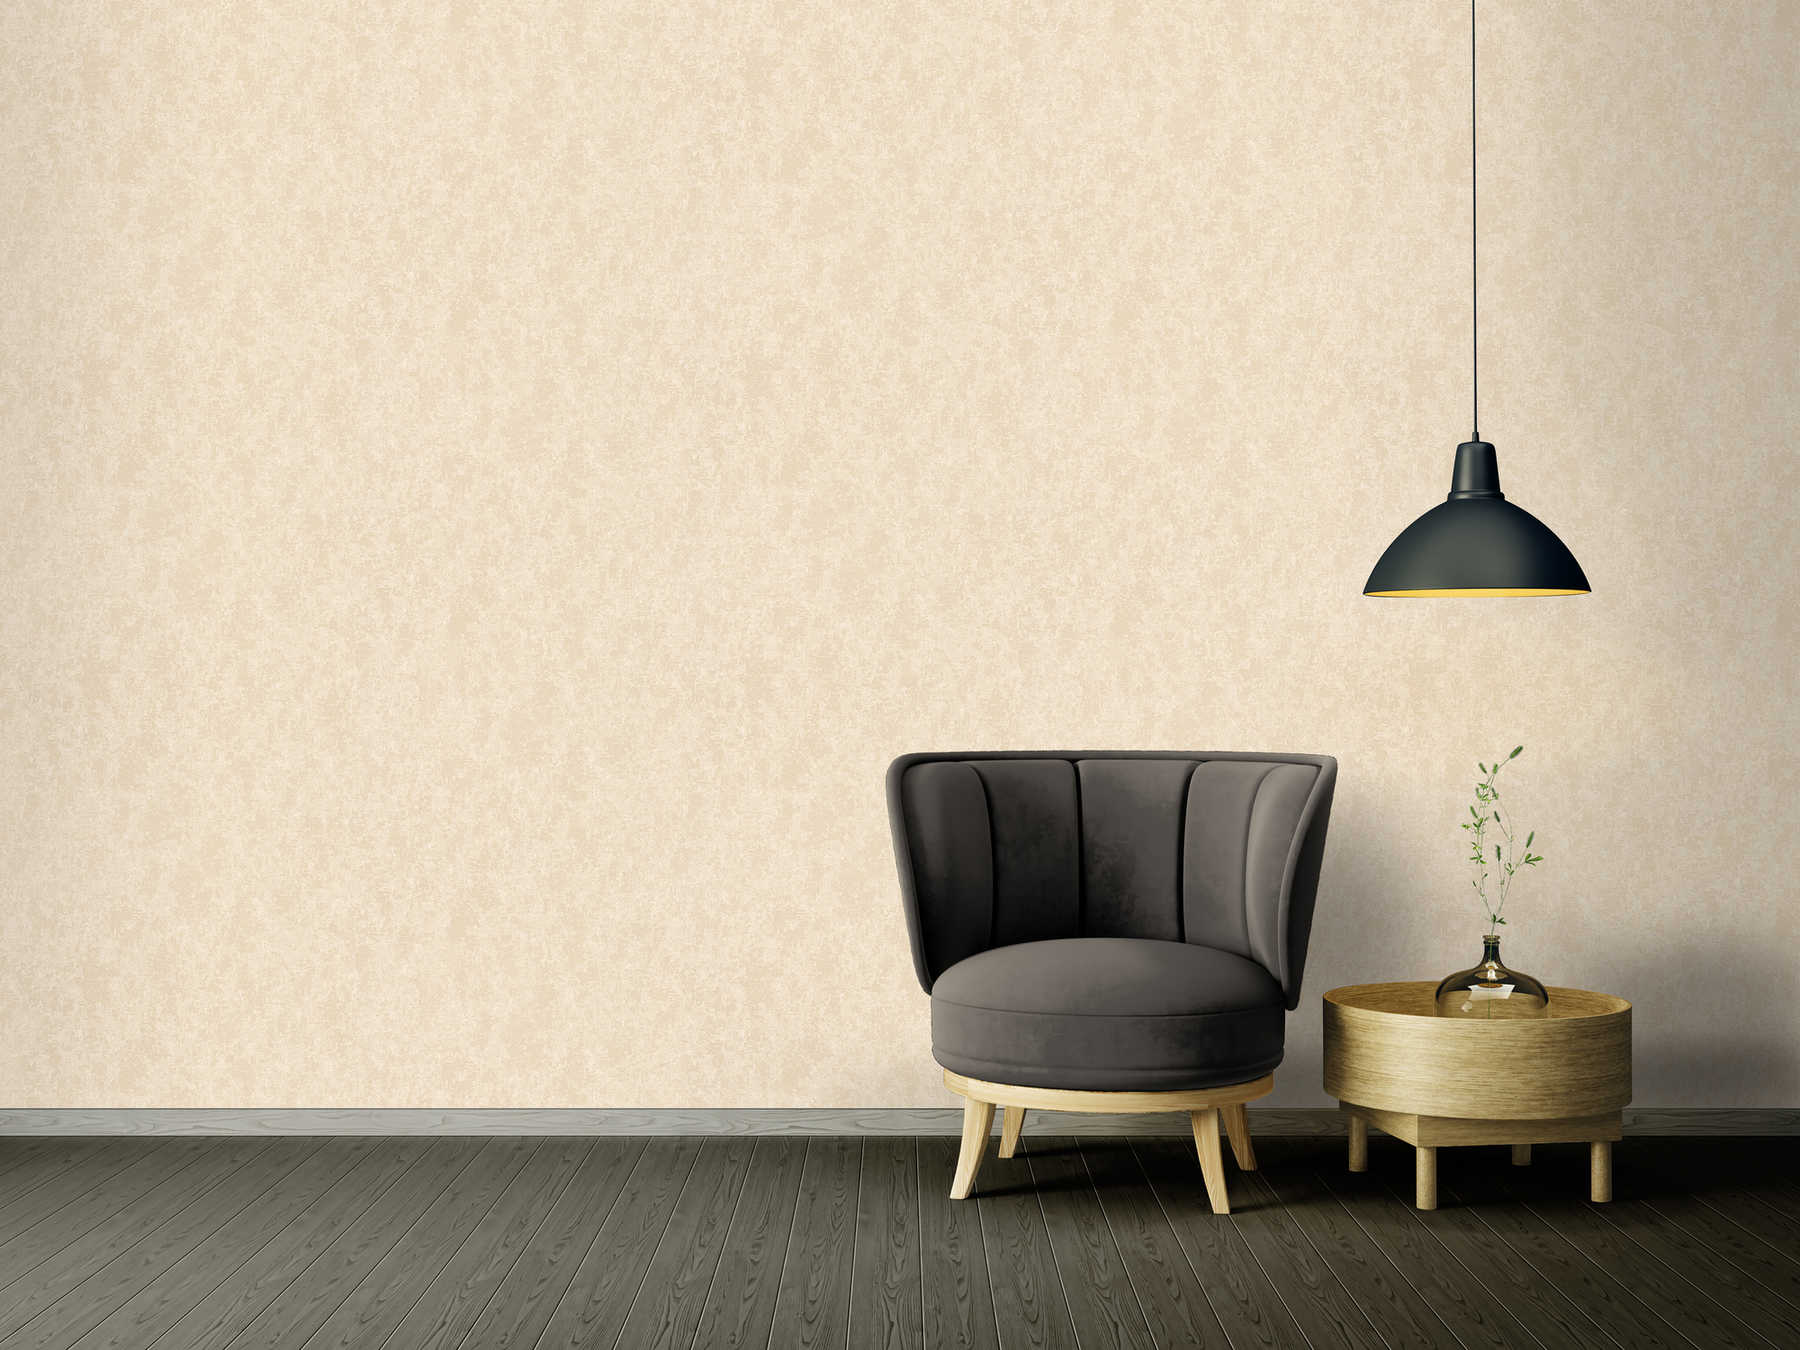             Beige plaster look wallpaper in classic style with mottled colour
        